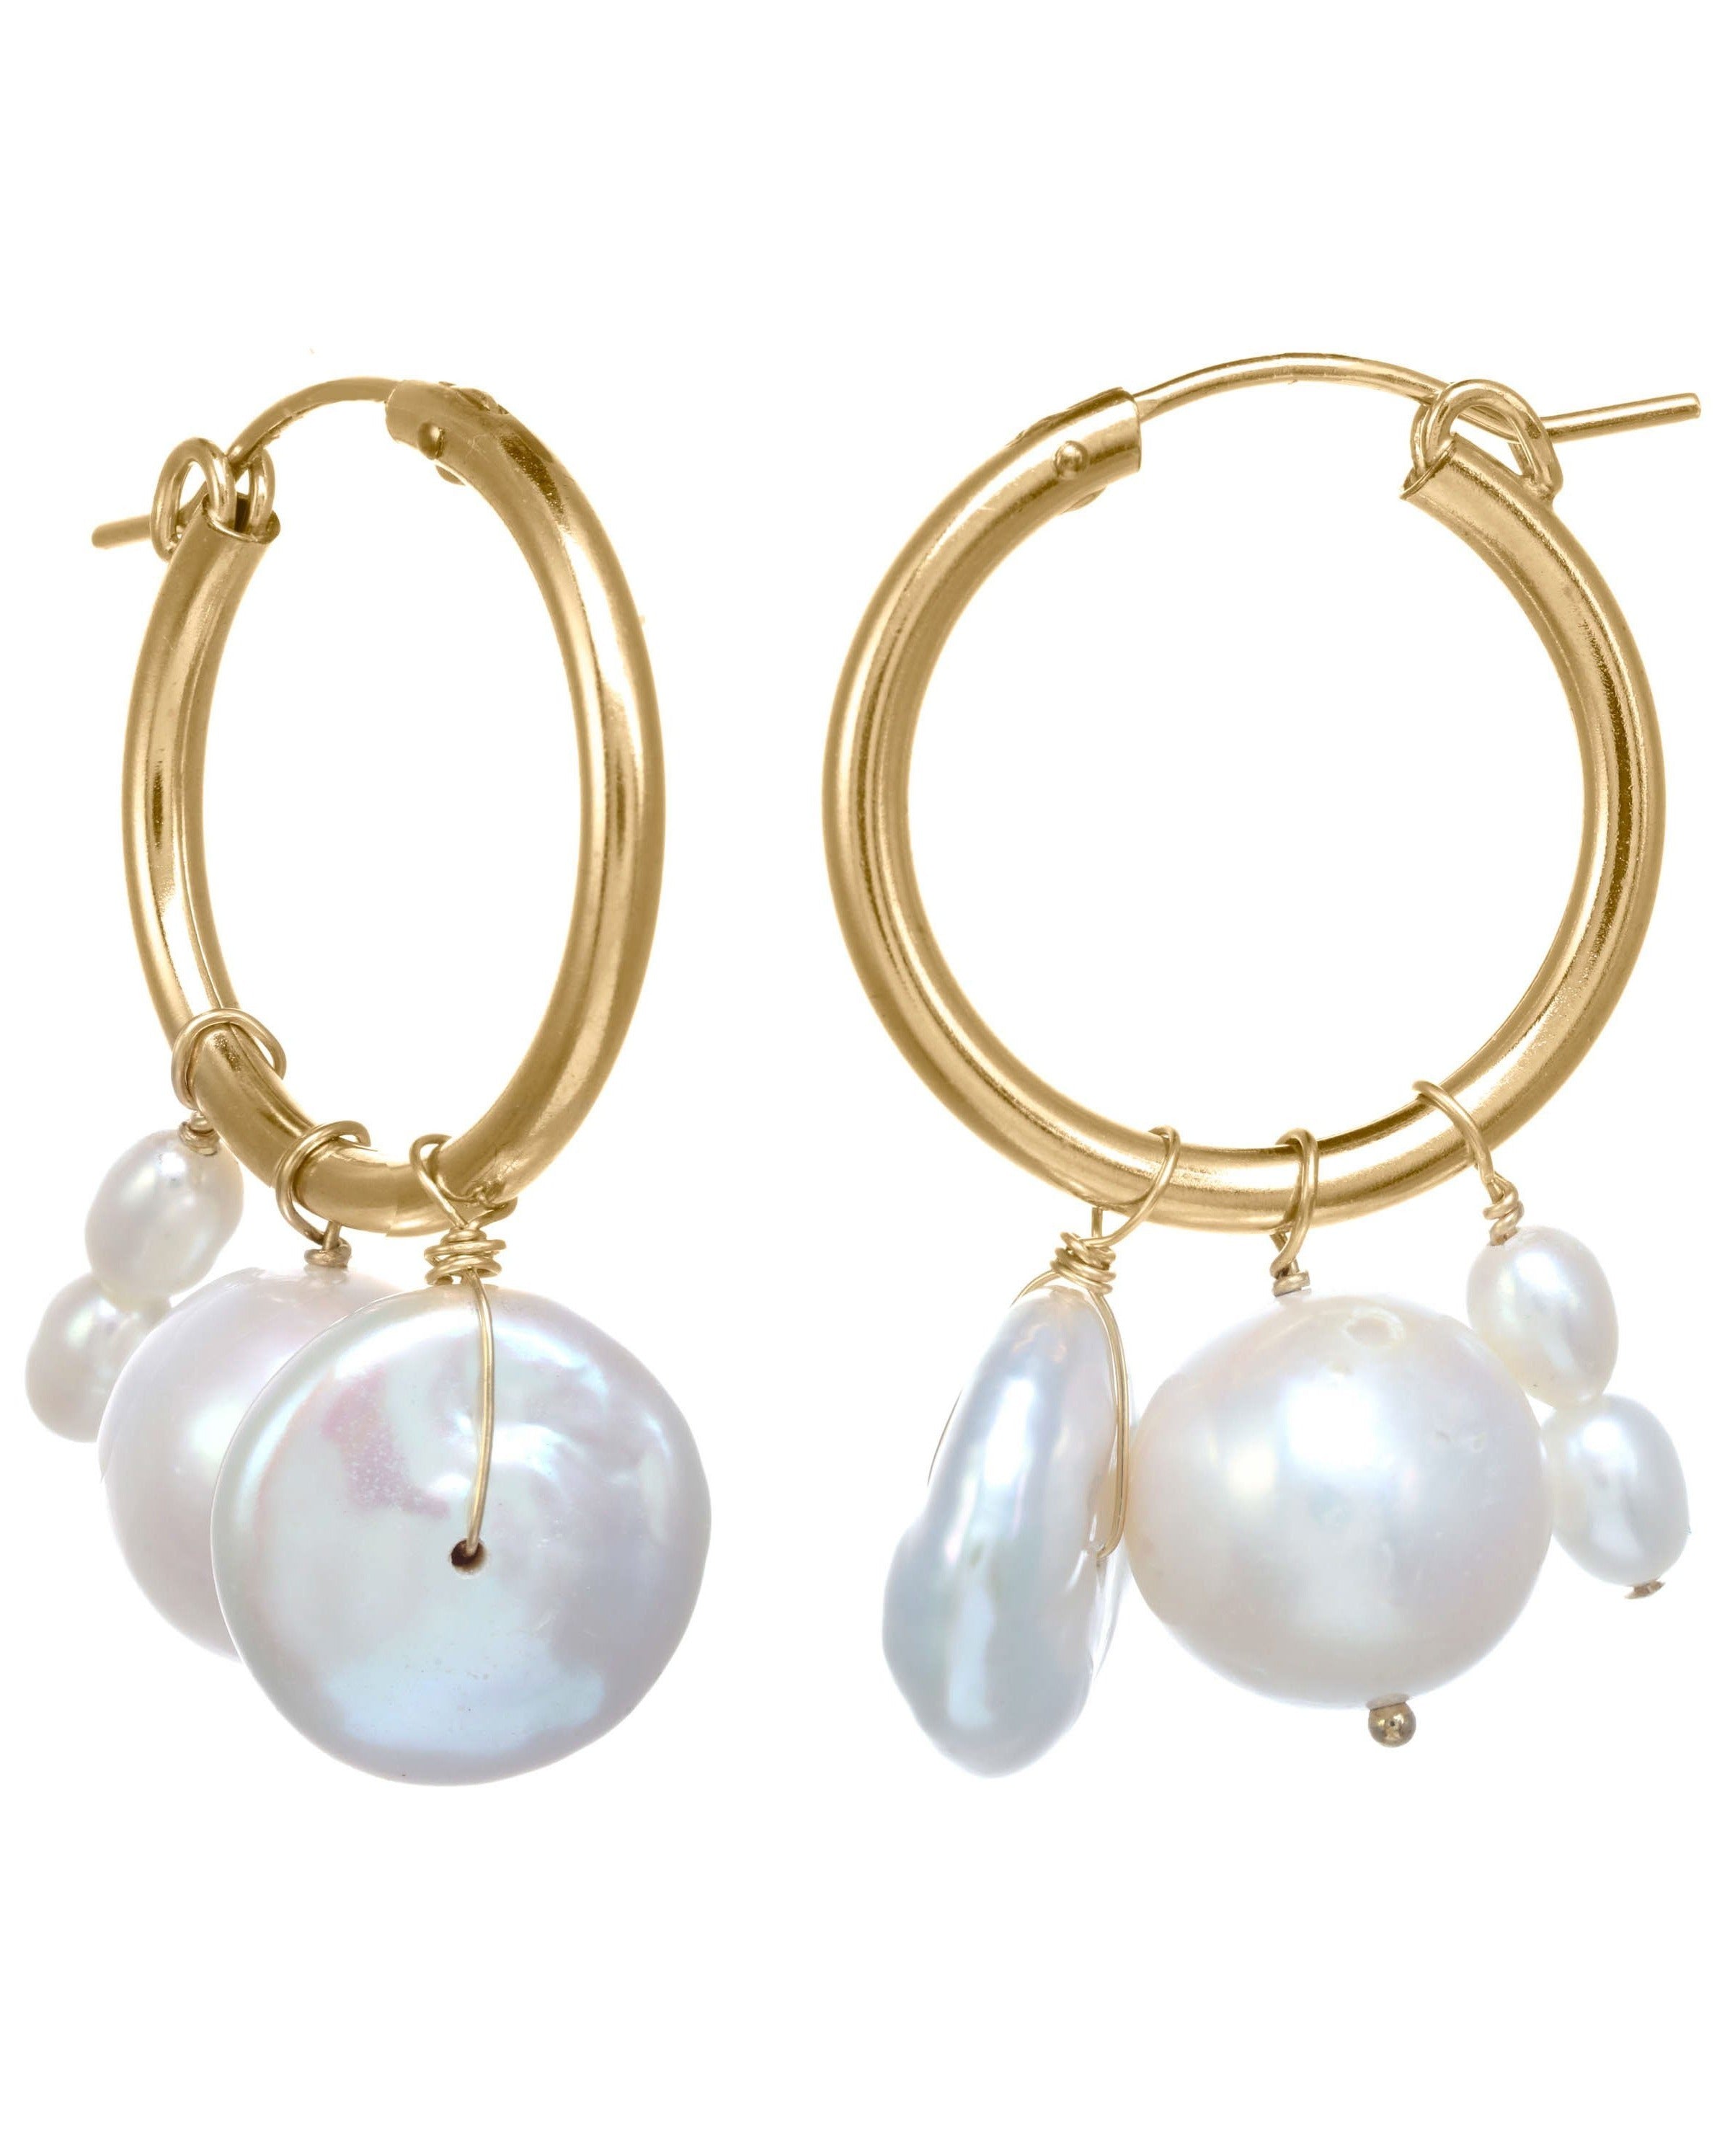 Nadia Hoop Earrings by KOZAKH. 22mm snap closure hoop earrings in 14K Gold Filled, featuring 3-4mm rice Pearls, a 7mm potato Pearl, and a 8mm Keshi Pearl.